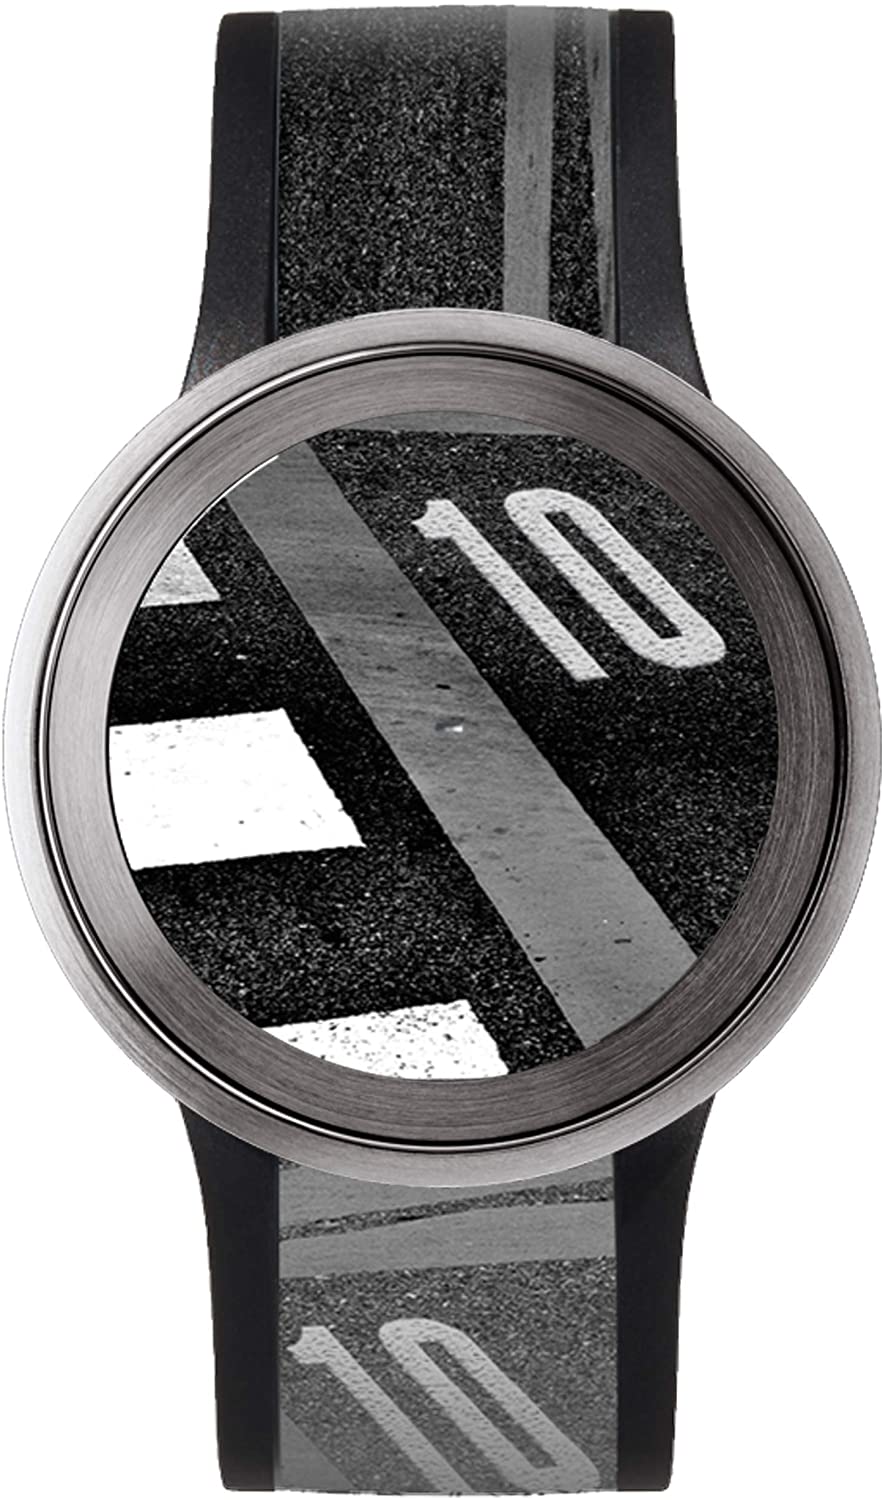 Competition: win Sony's customisable e-paper FES Watch U